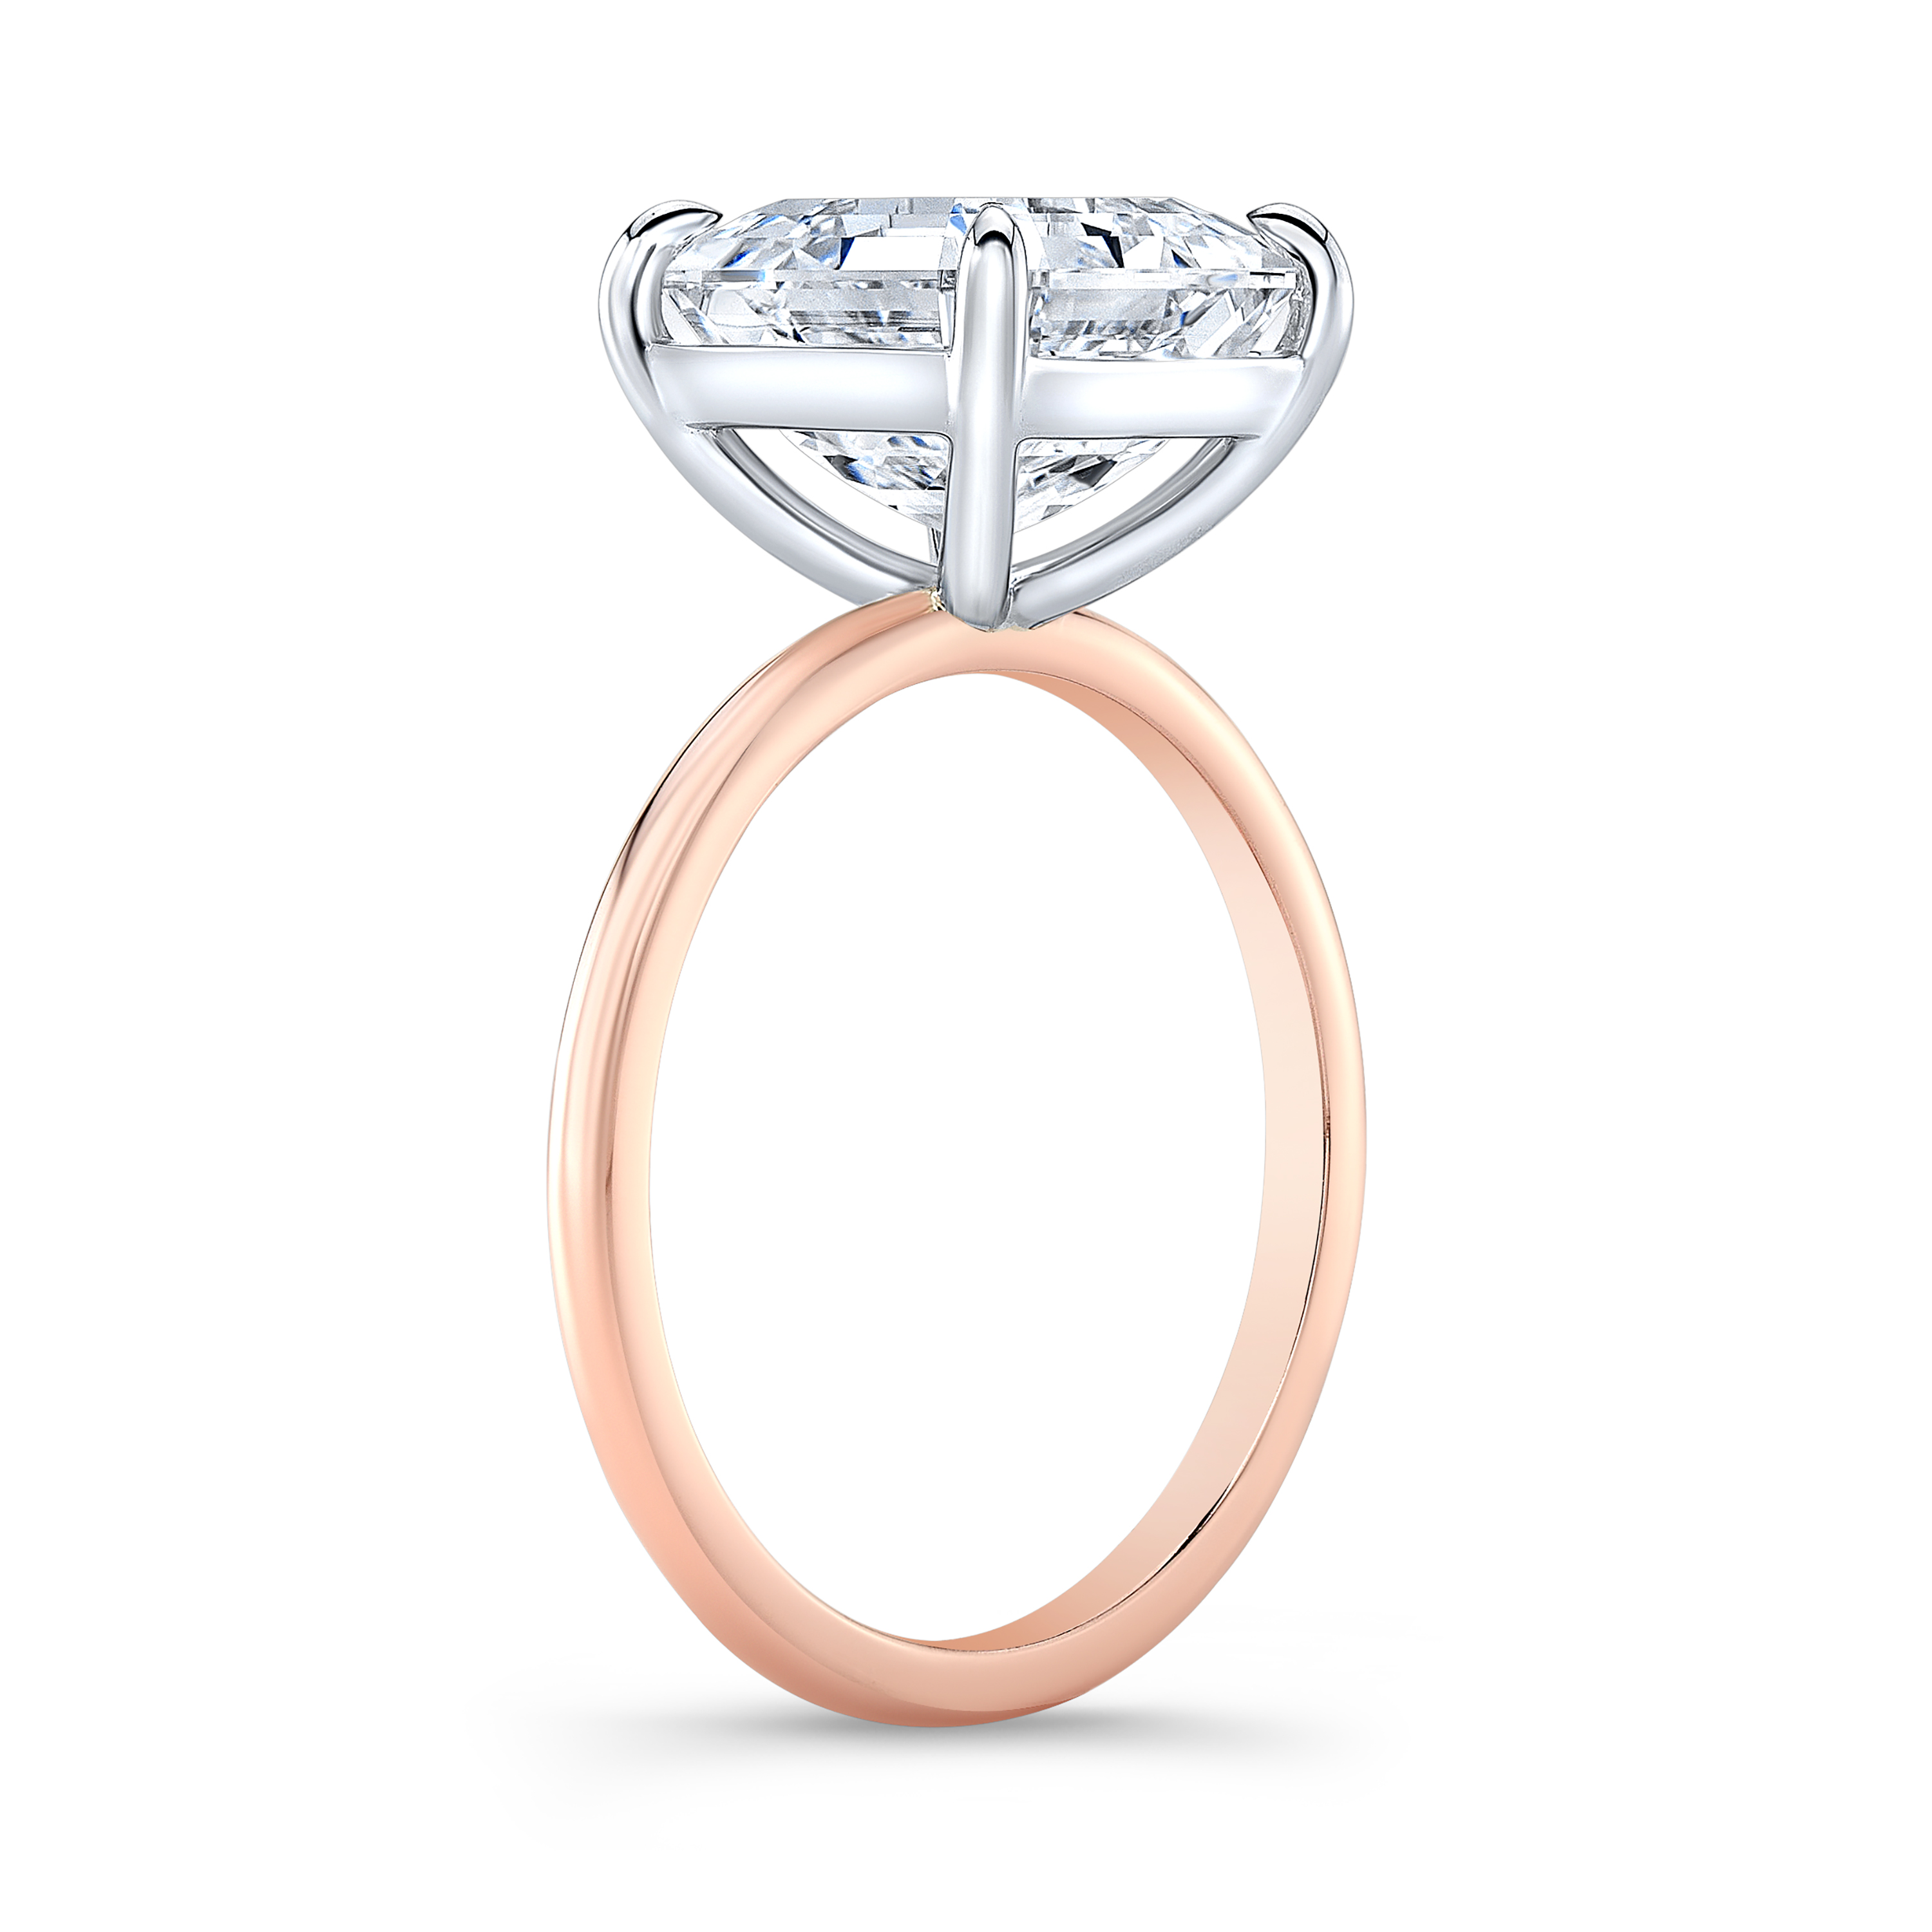 Ultra Thin Solitaire Engagement Ring